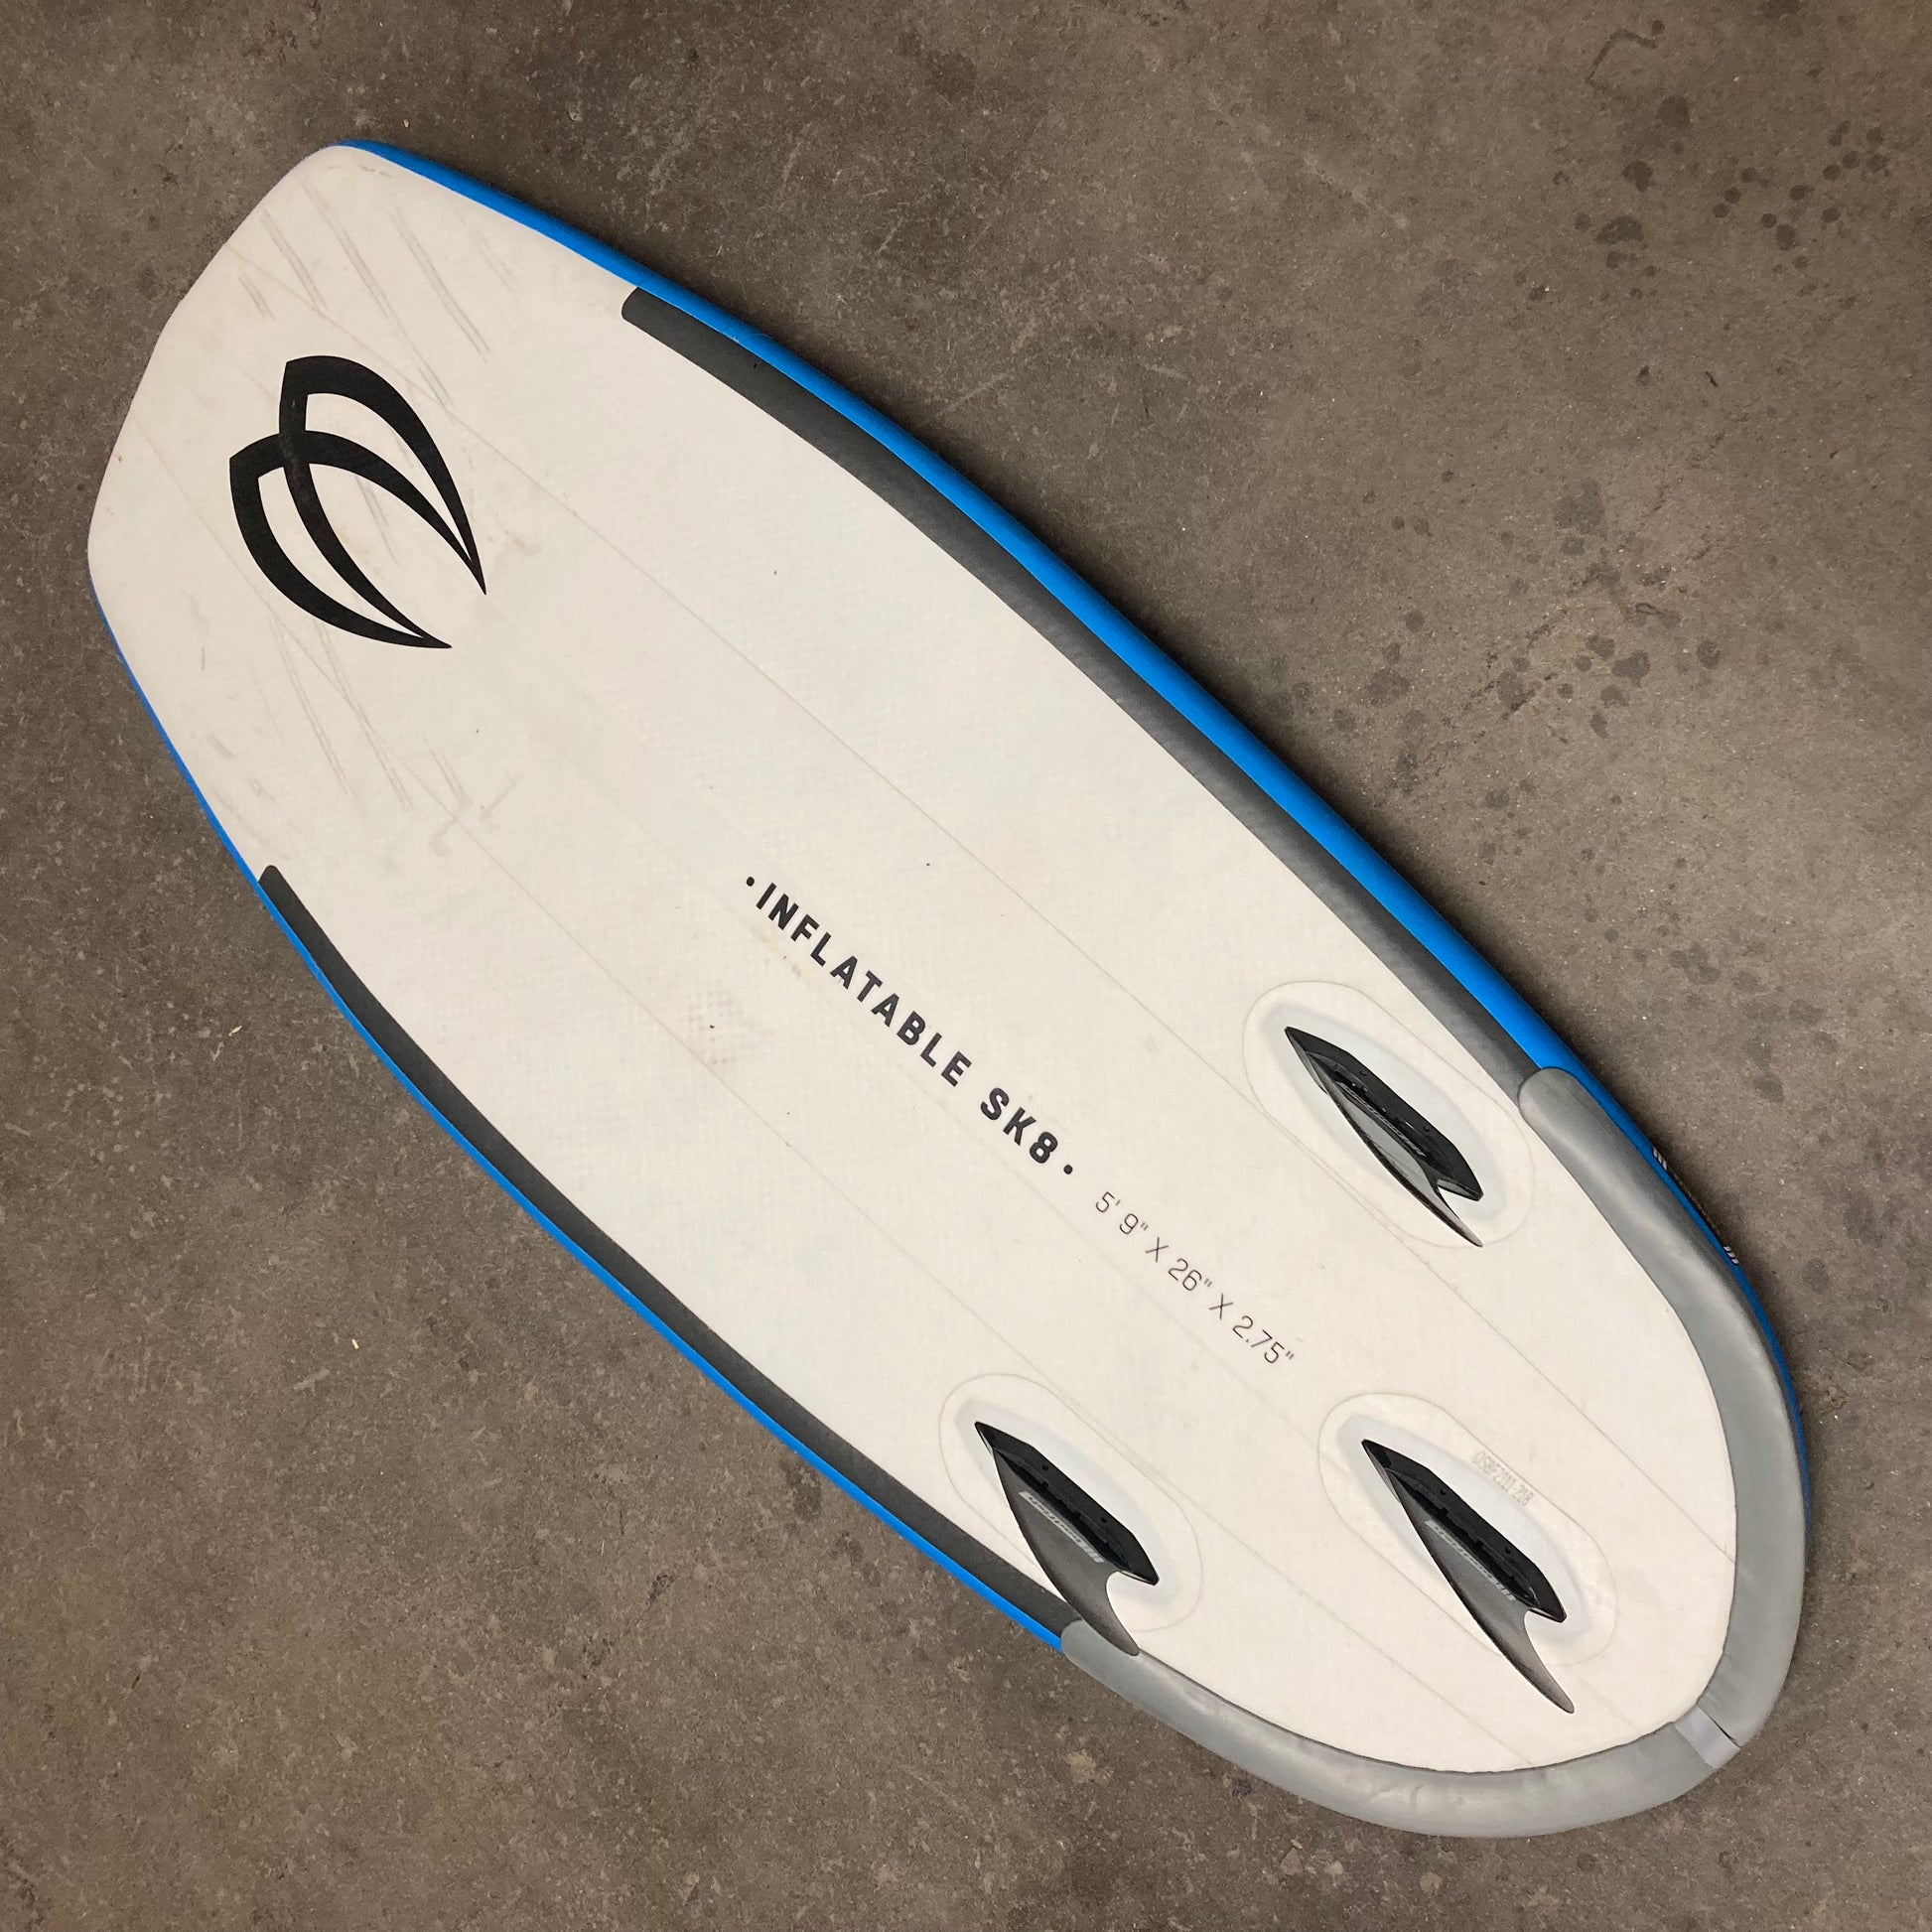 A white and blue Demo ISK8 surfboard laying on a concrete floor. (Brand: Badfish)